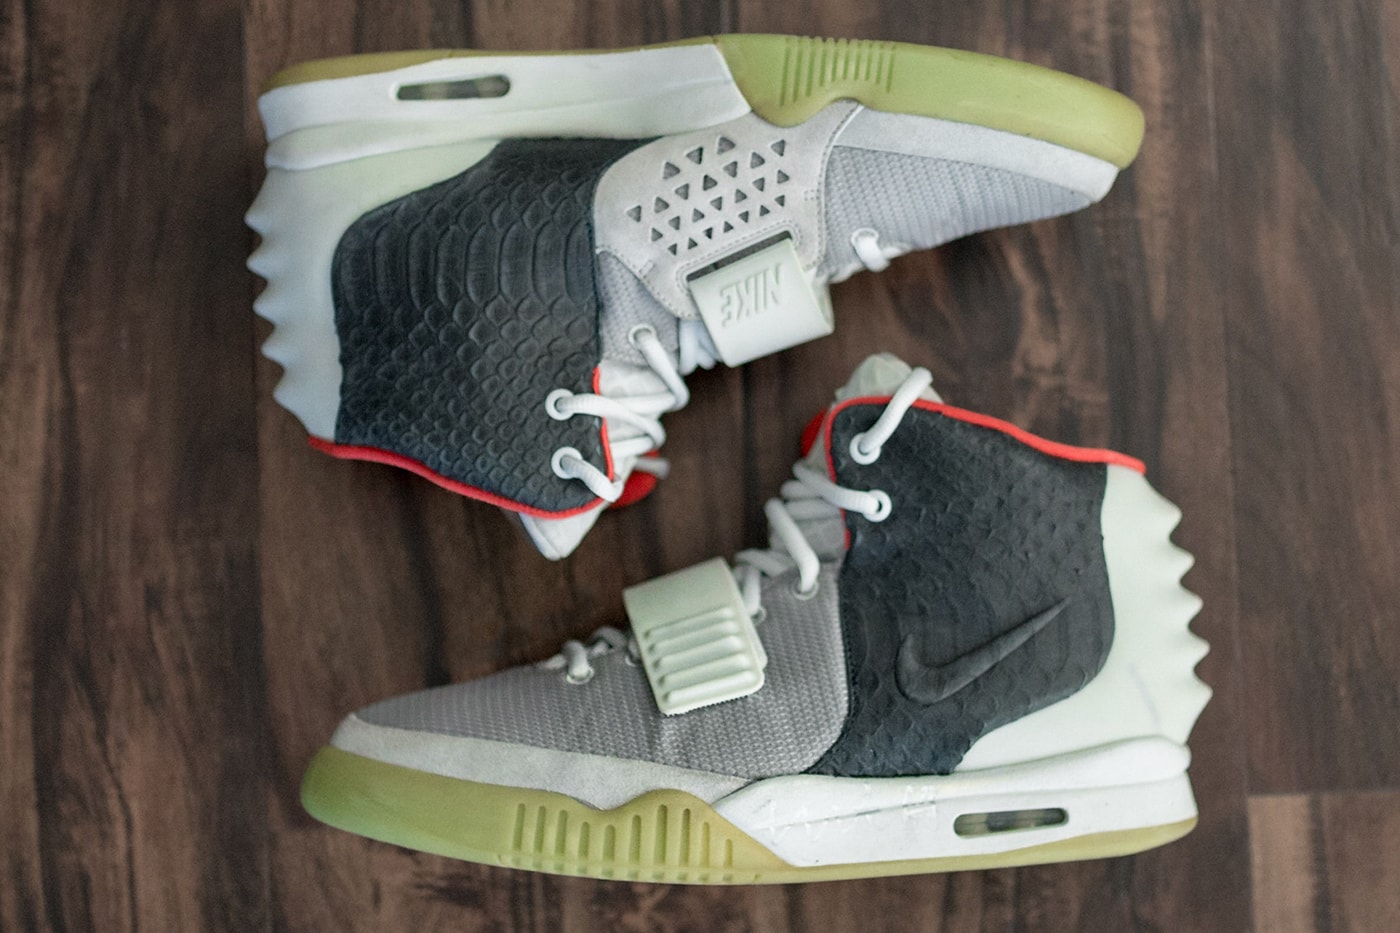 Nike Air Yeezy 2 Mismatch Sample 1/1 signed by Kanye